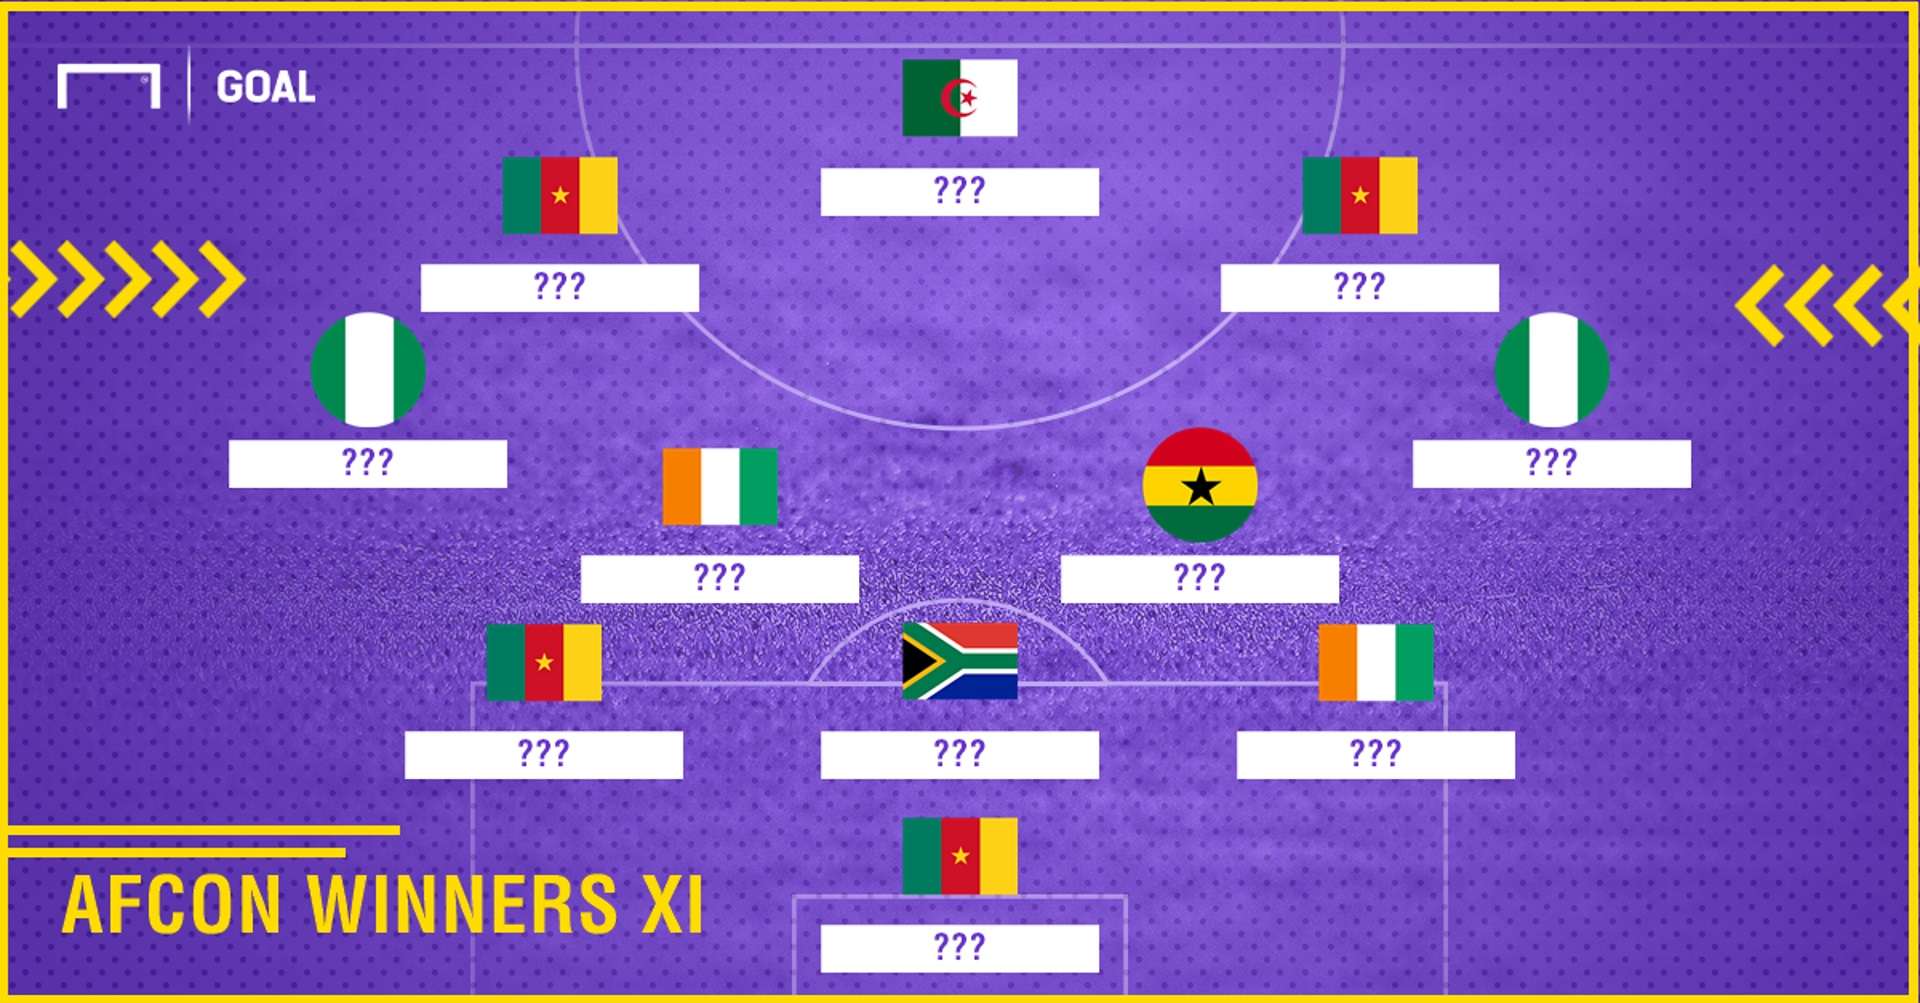 Afcon winners XI